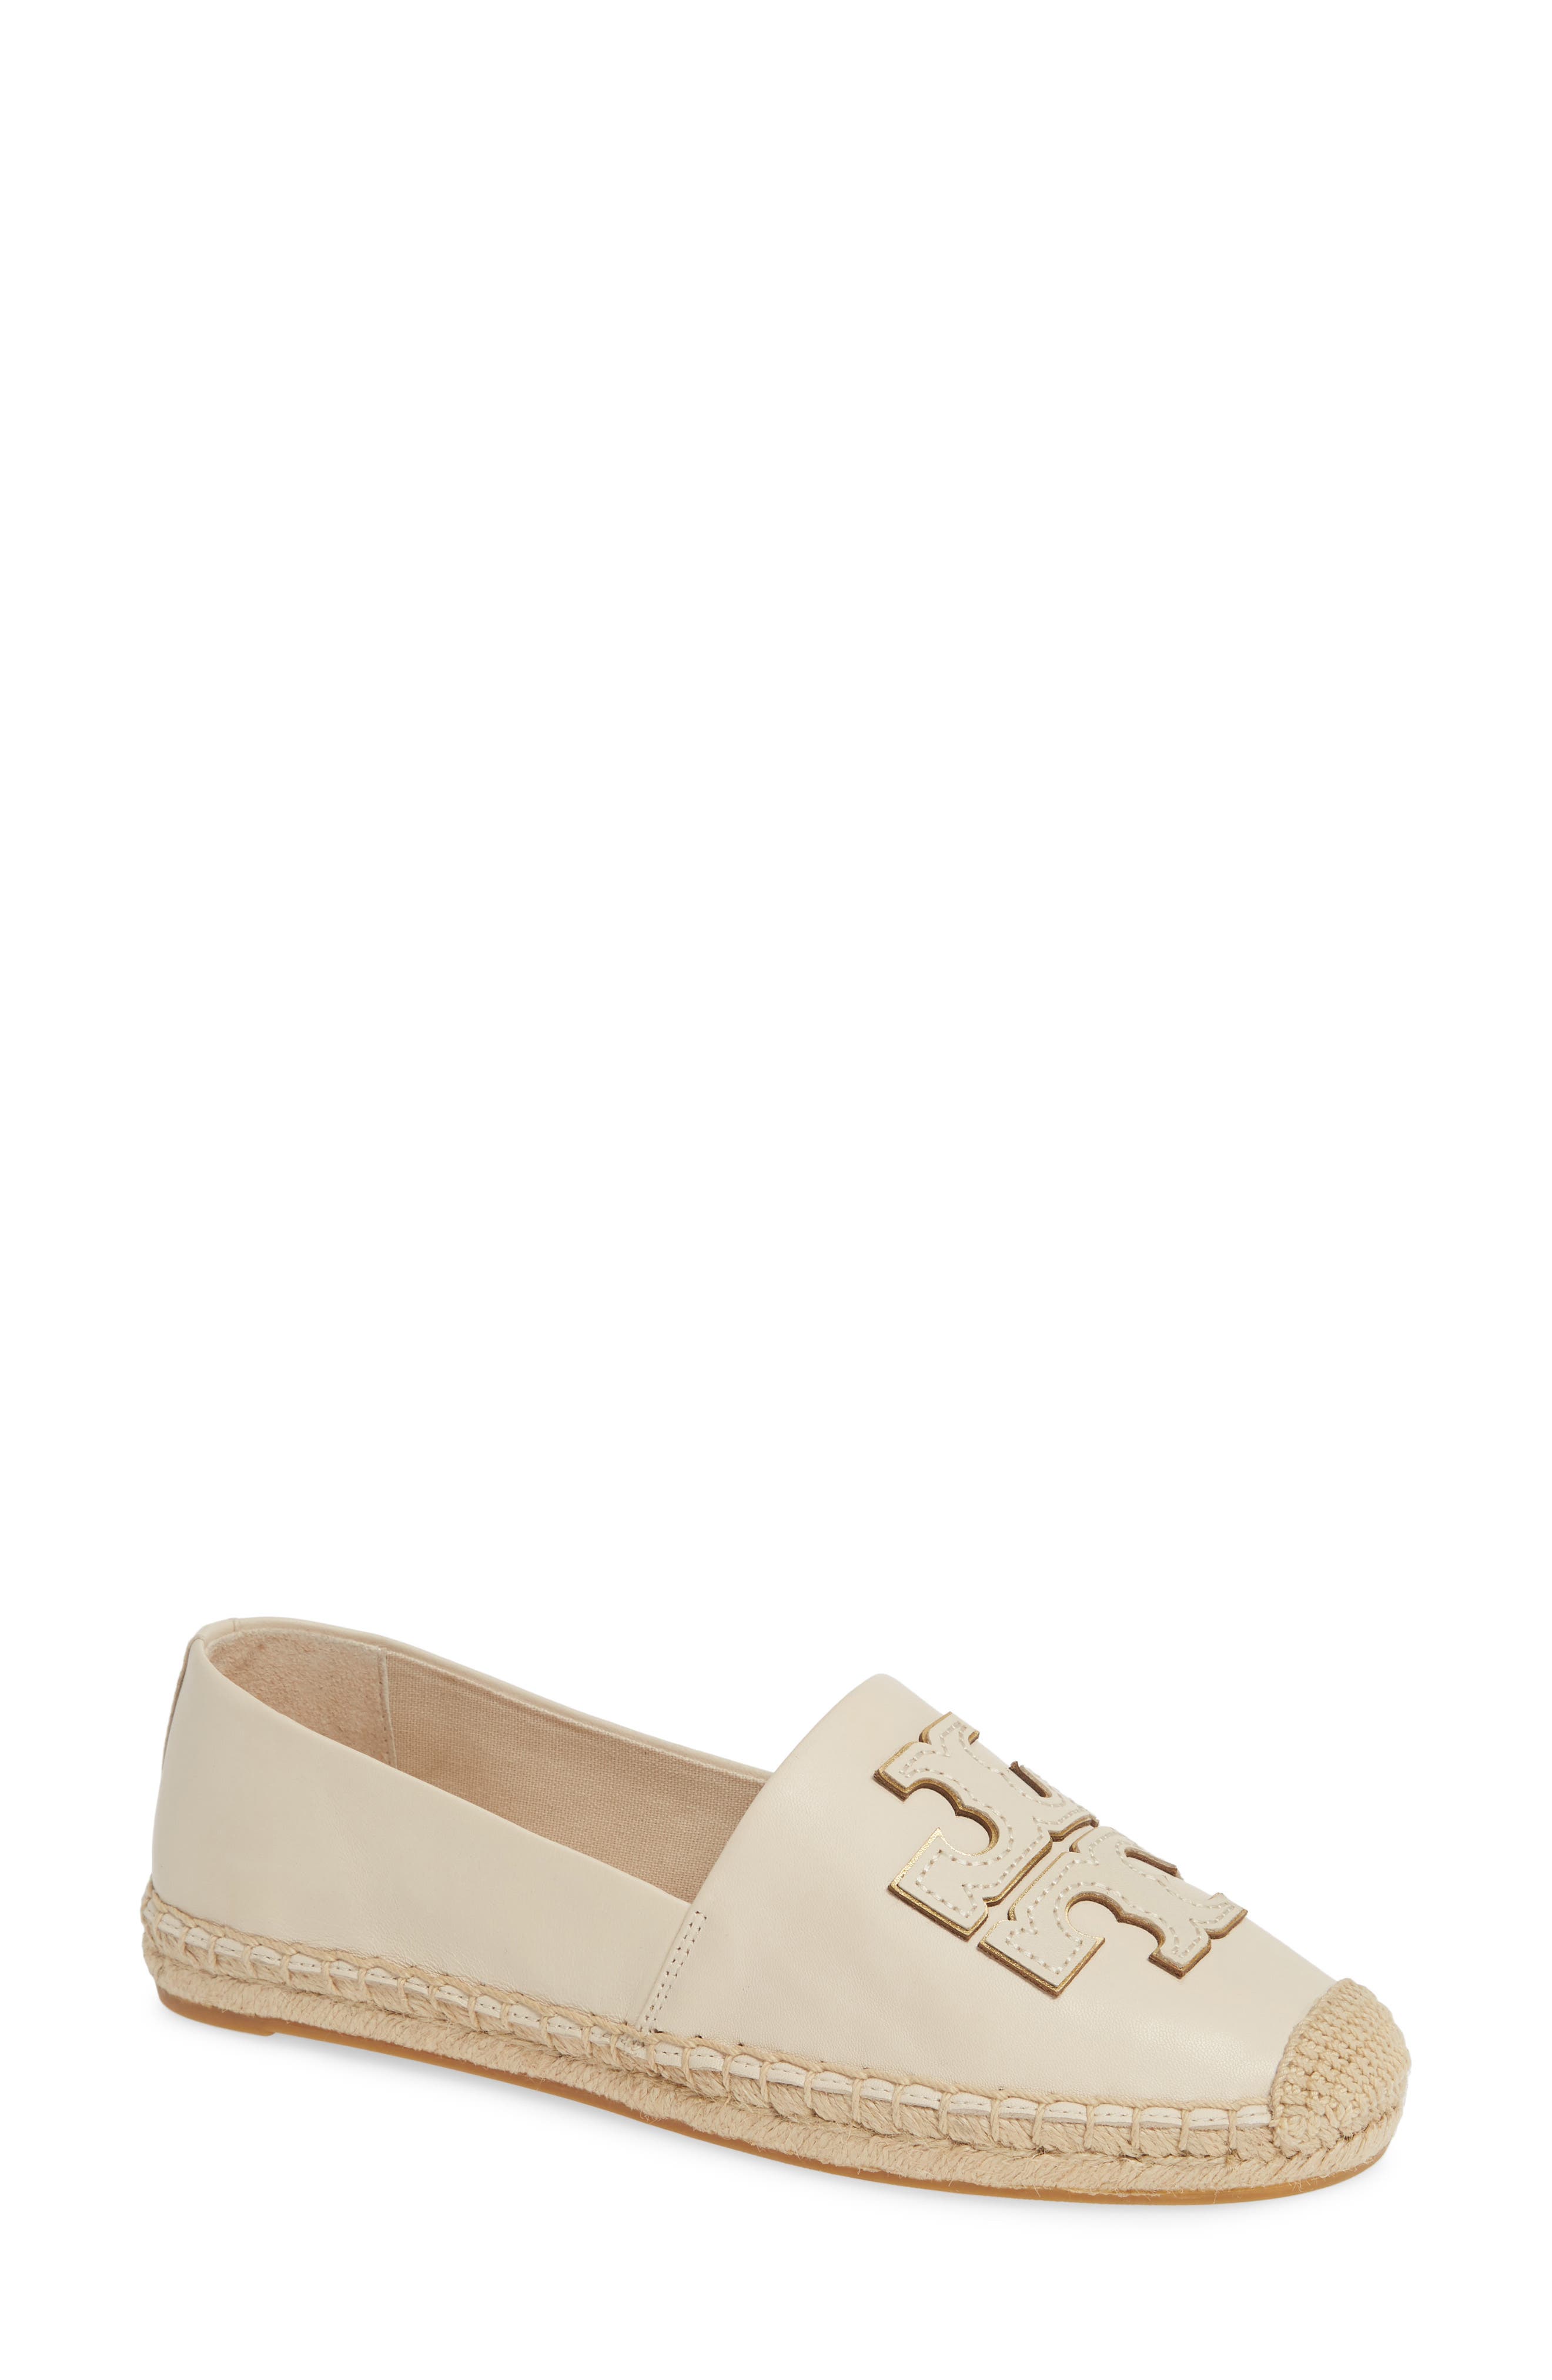 tory burch espadrille shoes